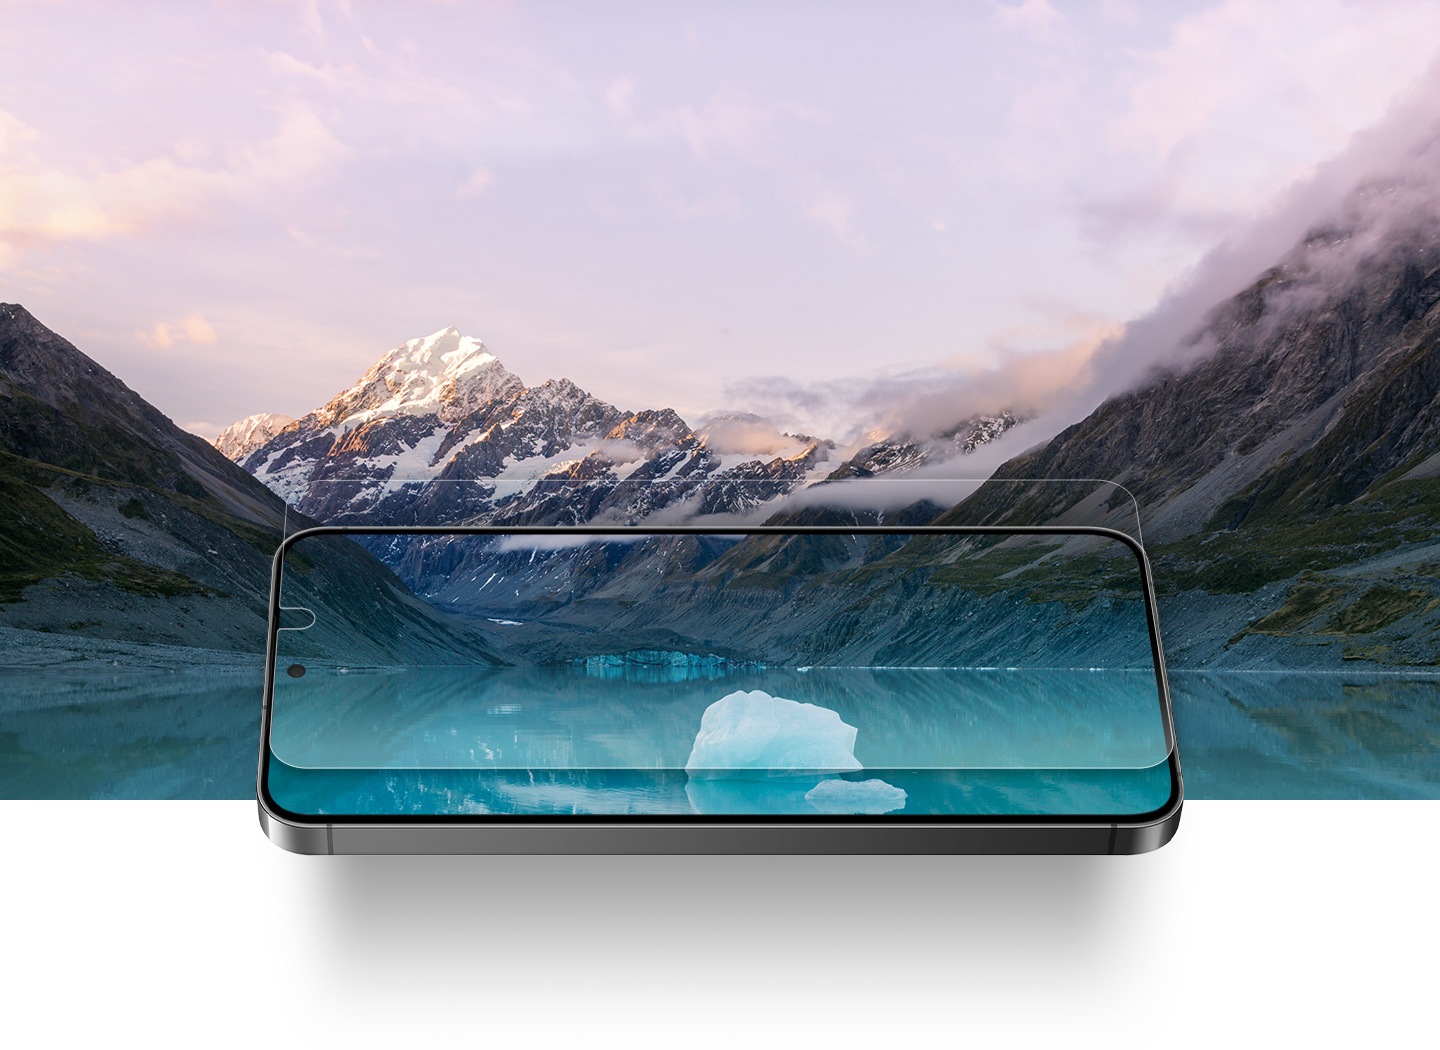 The Galaxy S24 Plus with the Anti-Reflecting Screen Protector is overlaid on a snowy landscape of mountains and a lake. The clarity of the landscape can be seen through the lenses-like transparency of the screen protector.